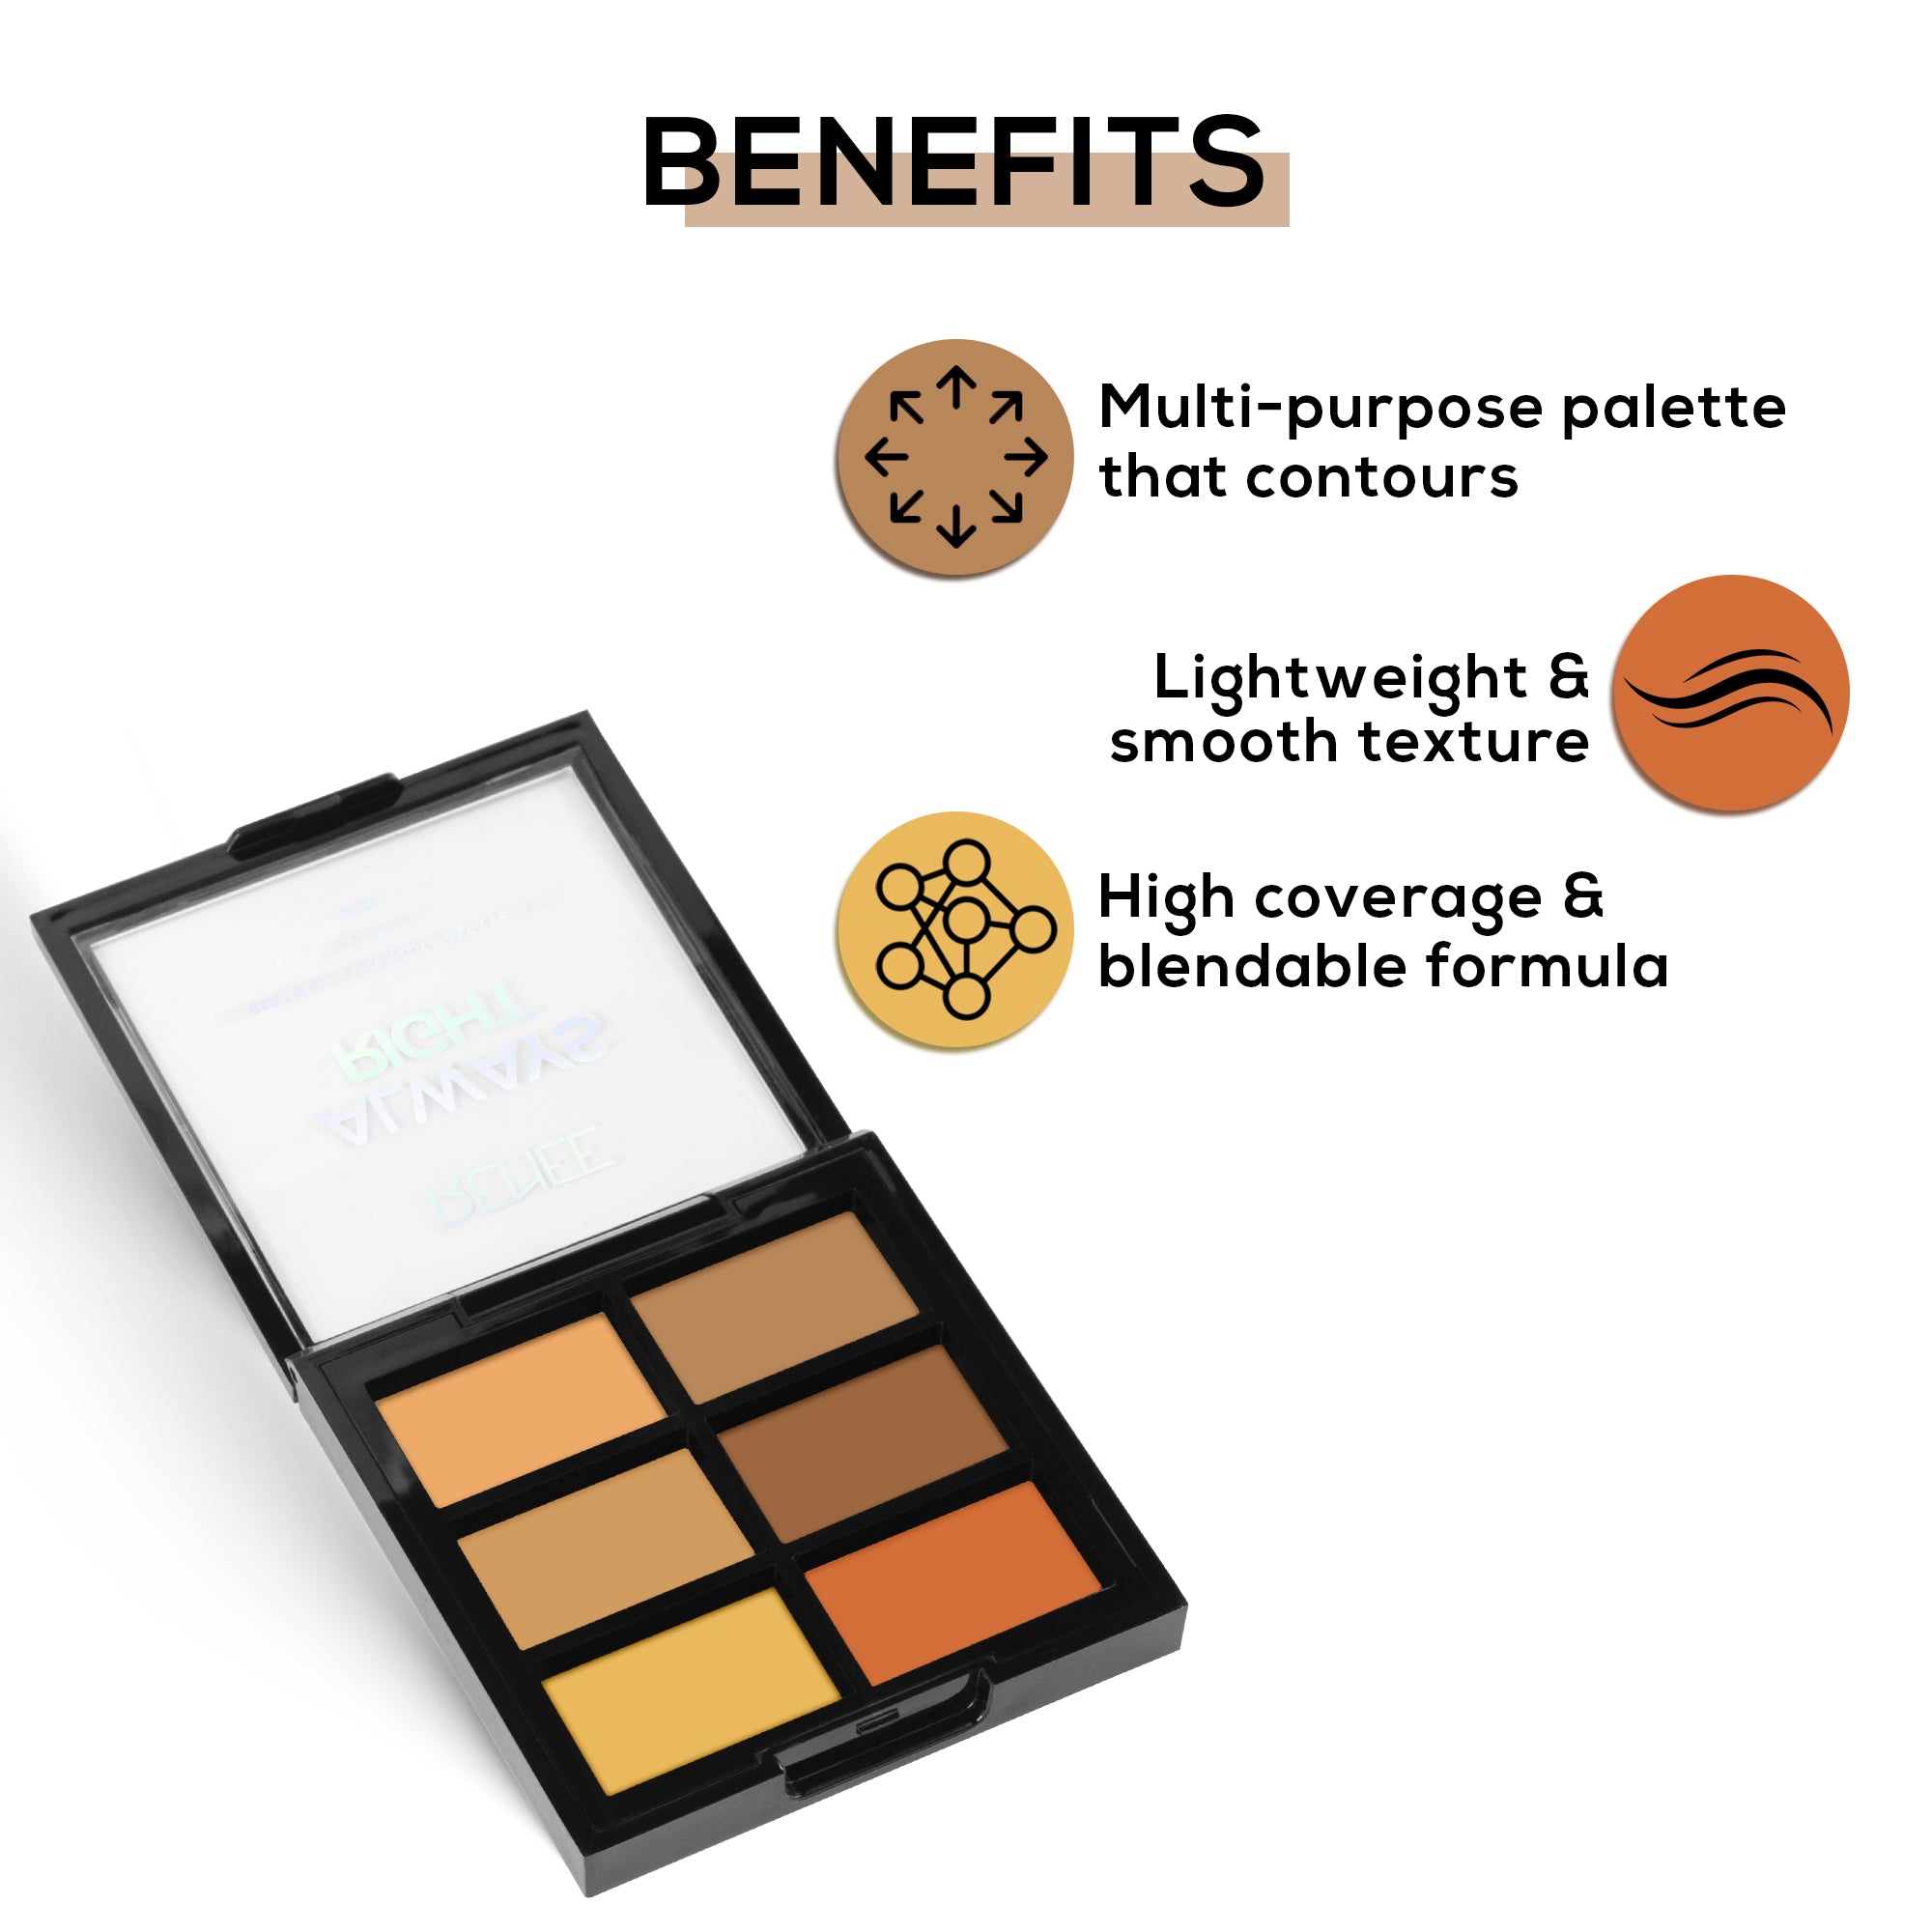 RENEE Always Right Conceal & Contour Palette, 15gm